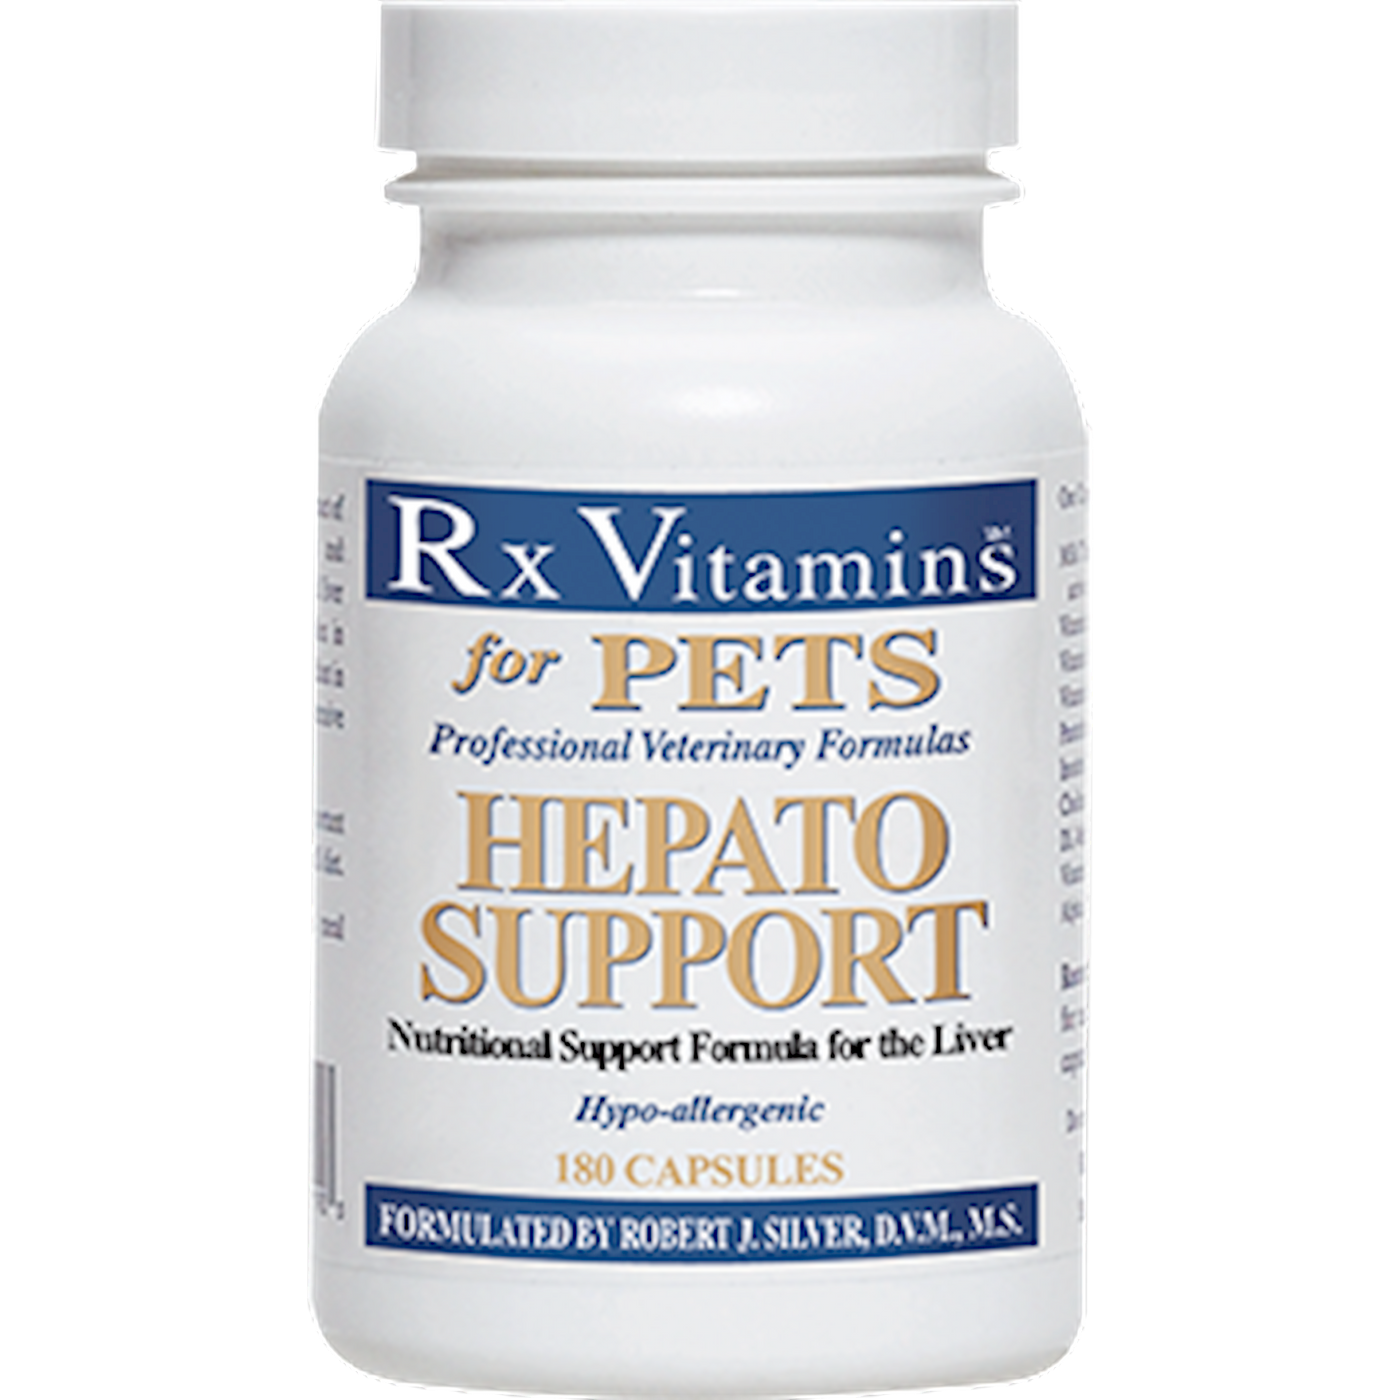 Hepato Support  Curated Wellness